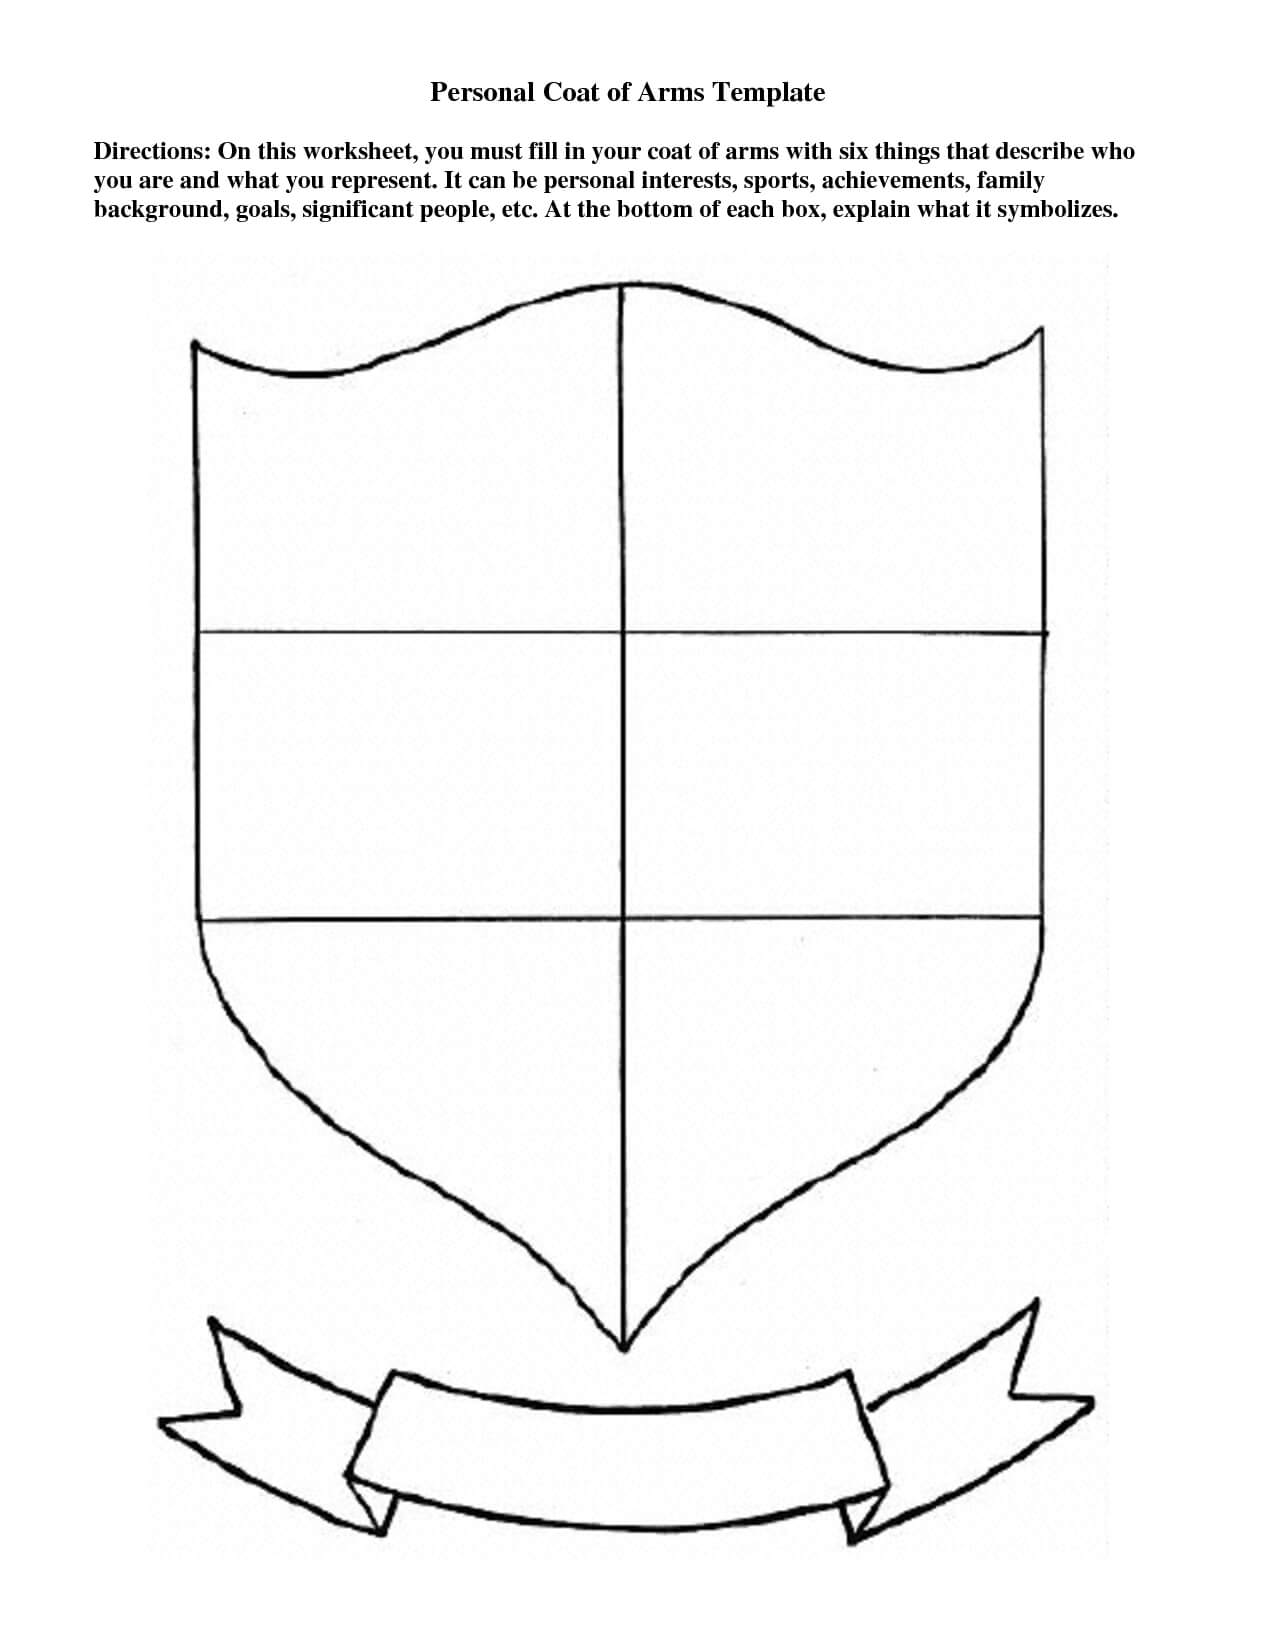 Personal Coat Of Arms Template | Coat Of Arms, Templates Pertaining To Blank Shield Template Printable